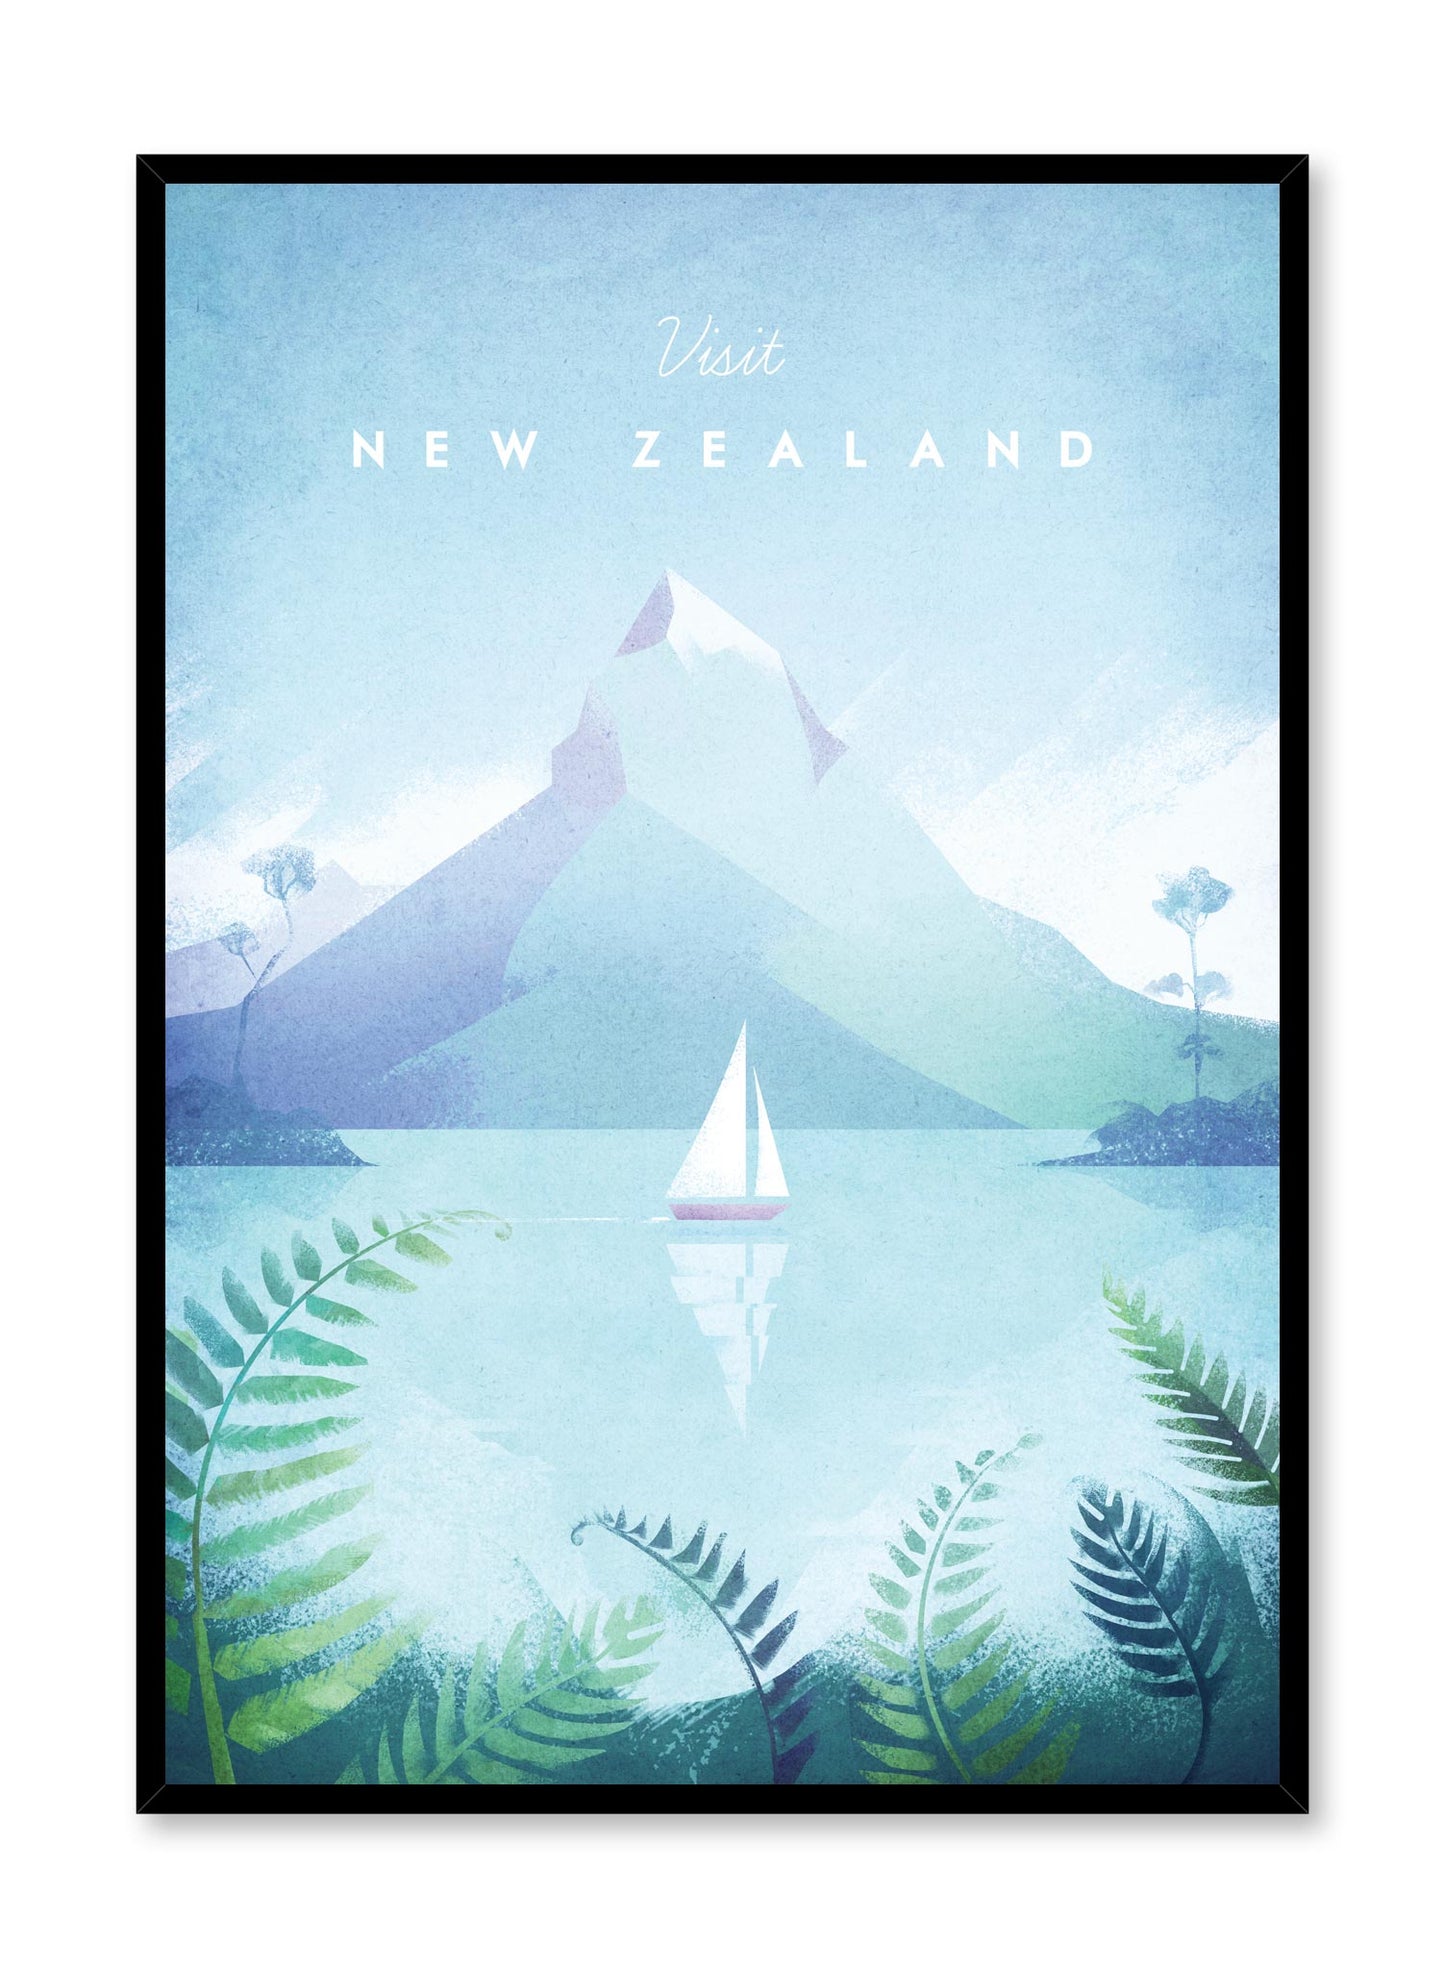 Modern minimalist travel poster by Opposite Wall with illustration of New Zealand